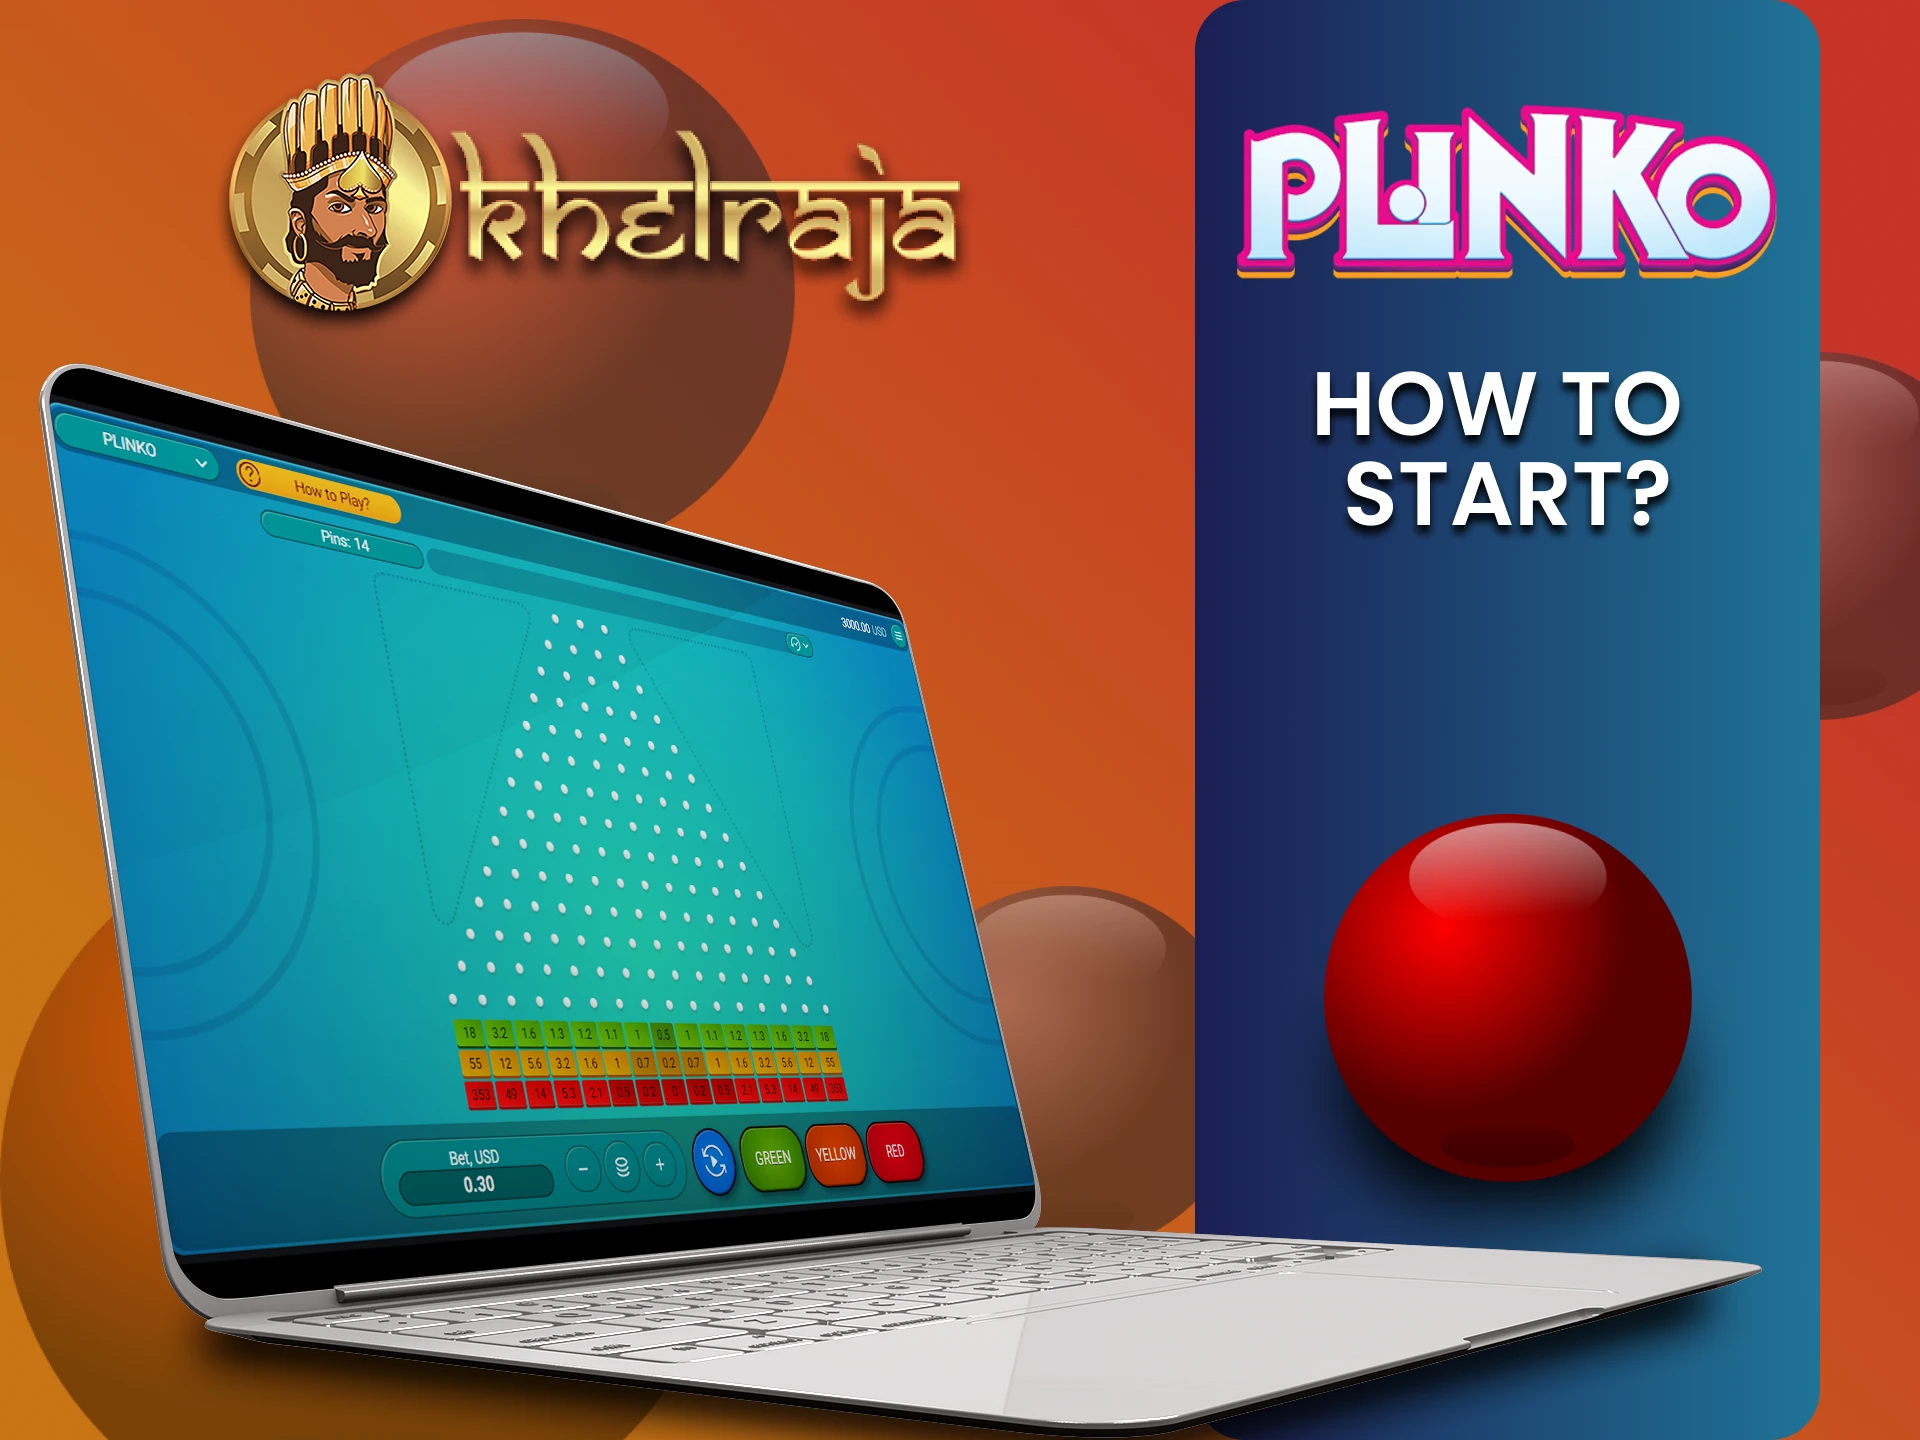 Select Plinko in the Khelraja casino section to start the game.